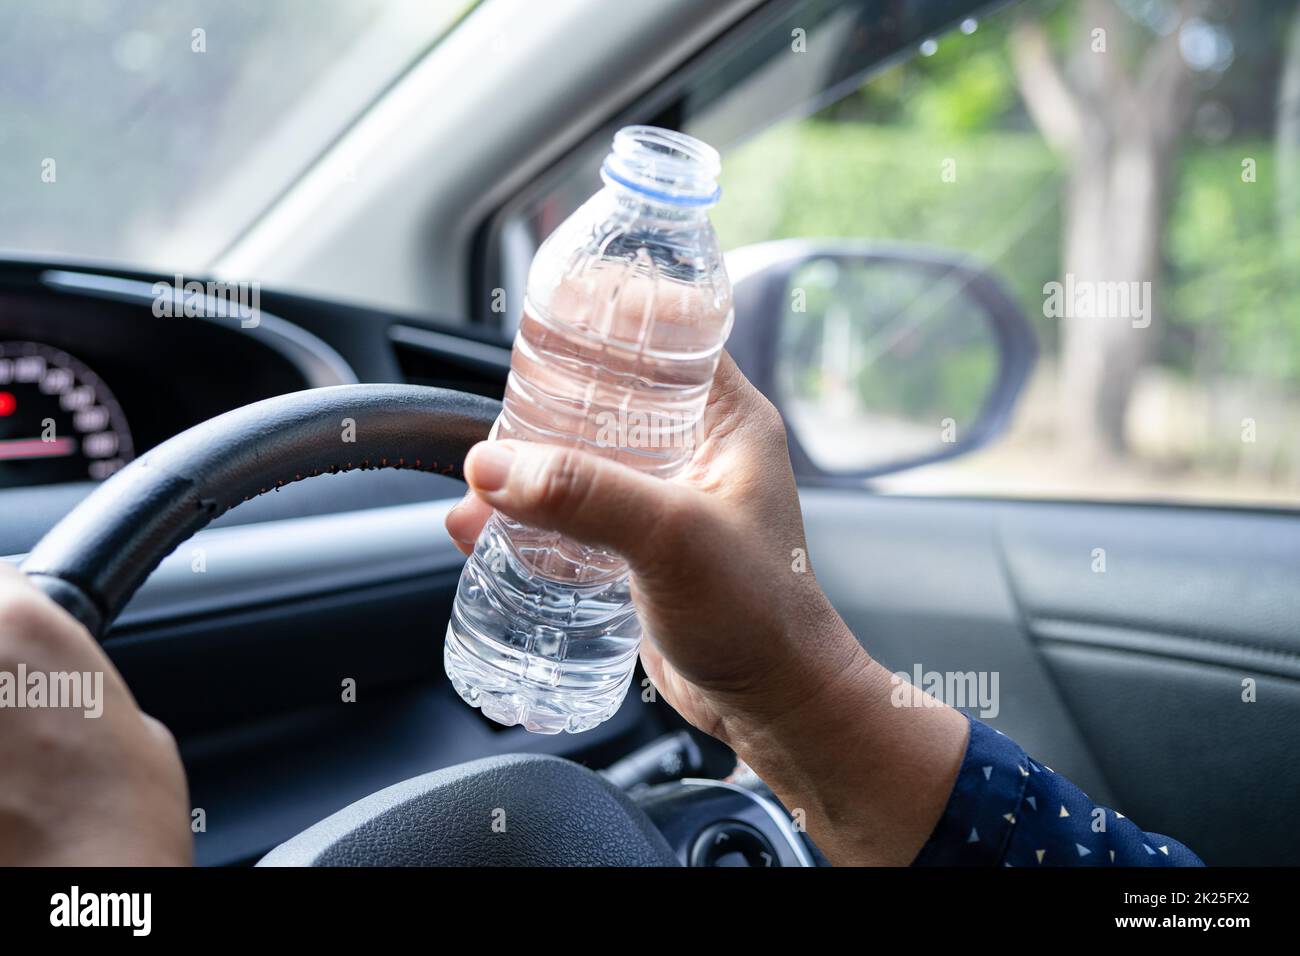 https://c8.alamy.com/comp/2K25FX2/asian-woman-driver-holding-bottle-for-drink-water-while-driving-a-car-plastic-hot-water-bottle-cause-fire-2K25FX2.jpg